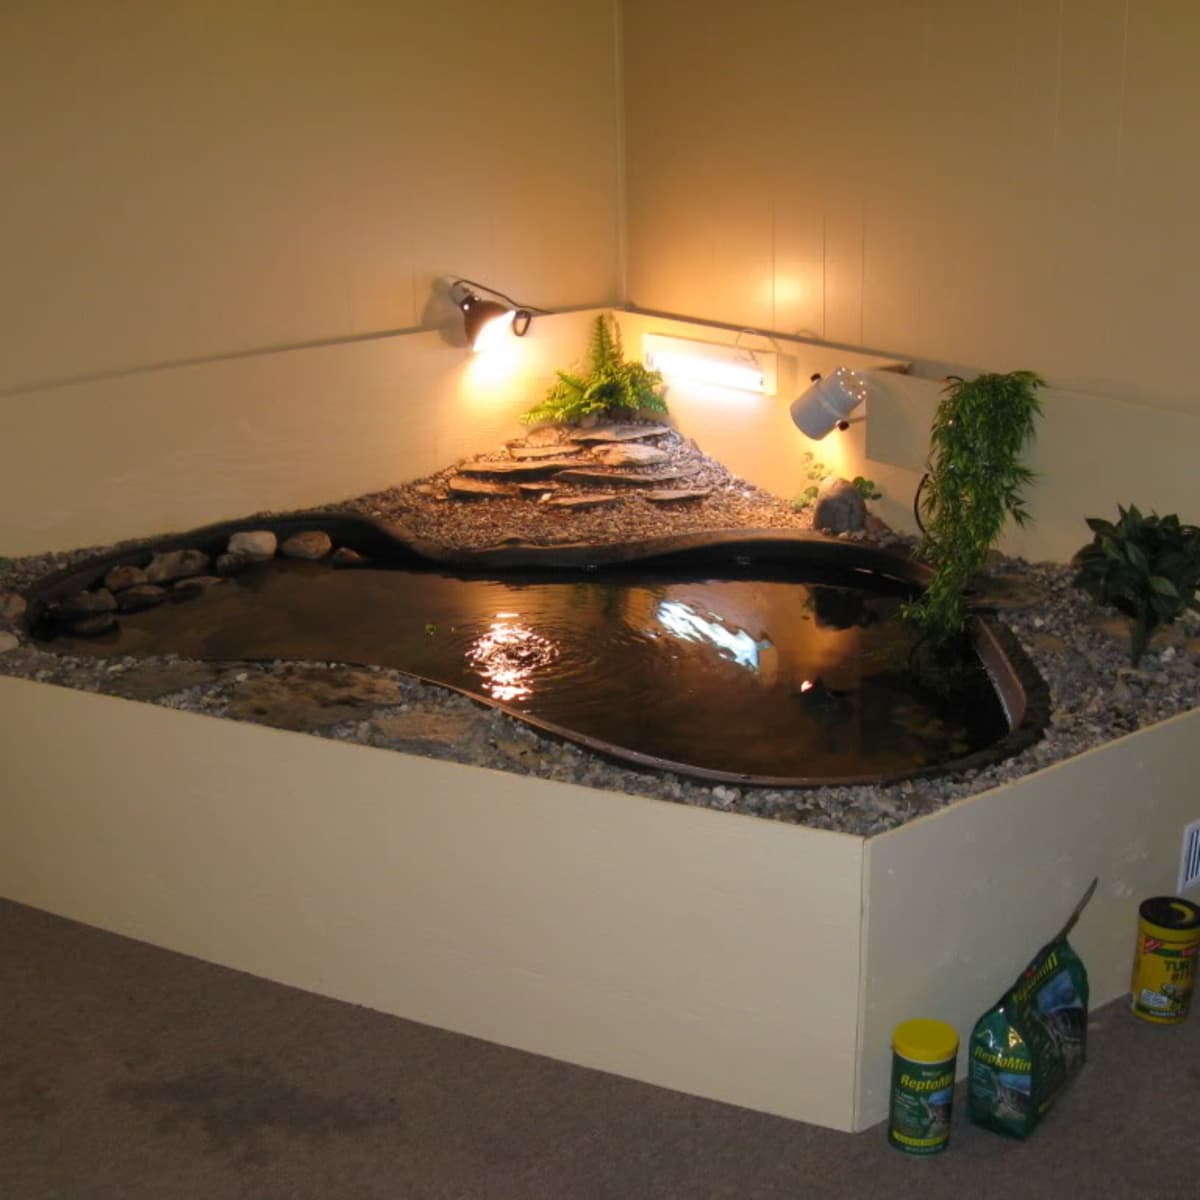 Housing the Aquatic Turtle - HubPages